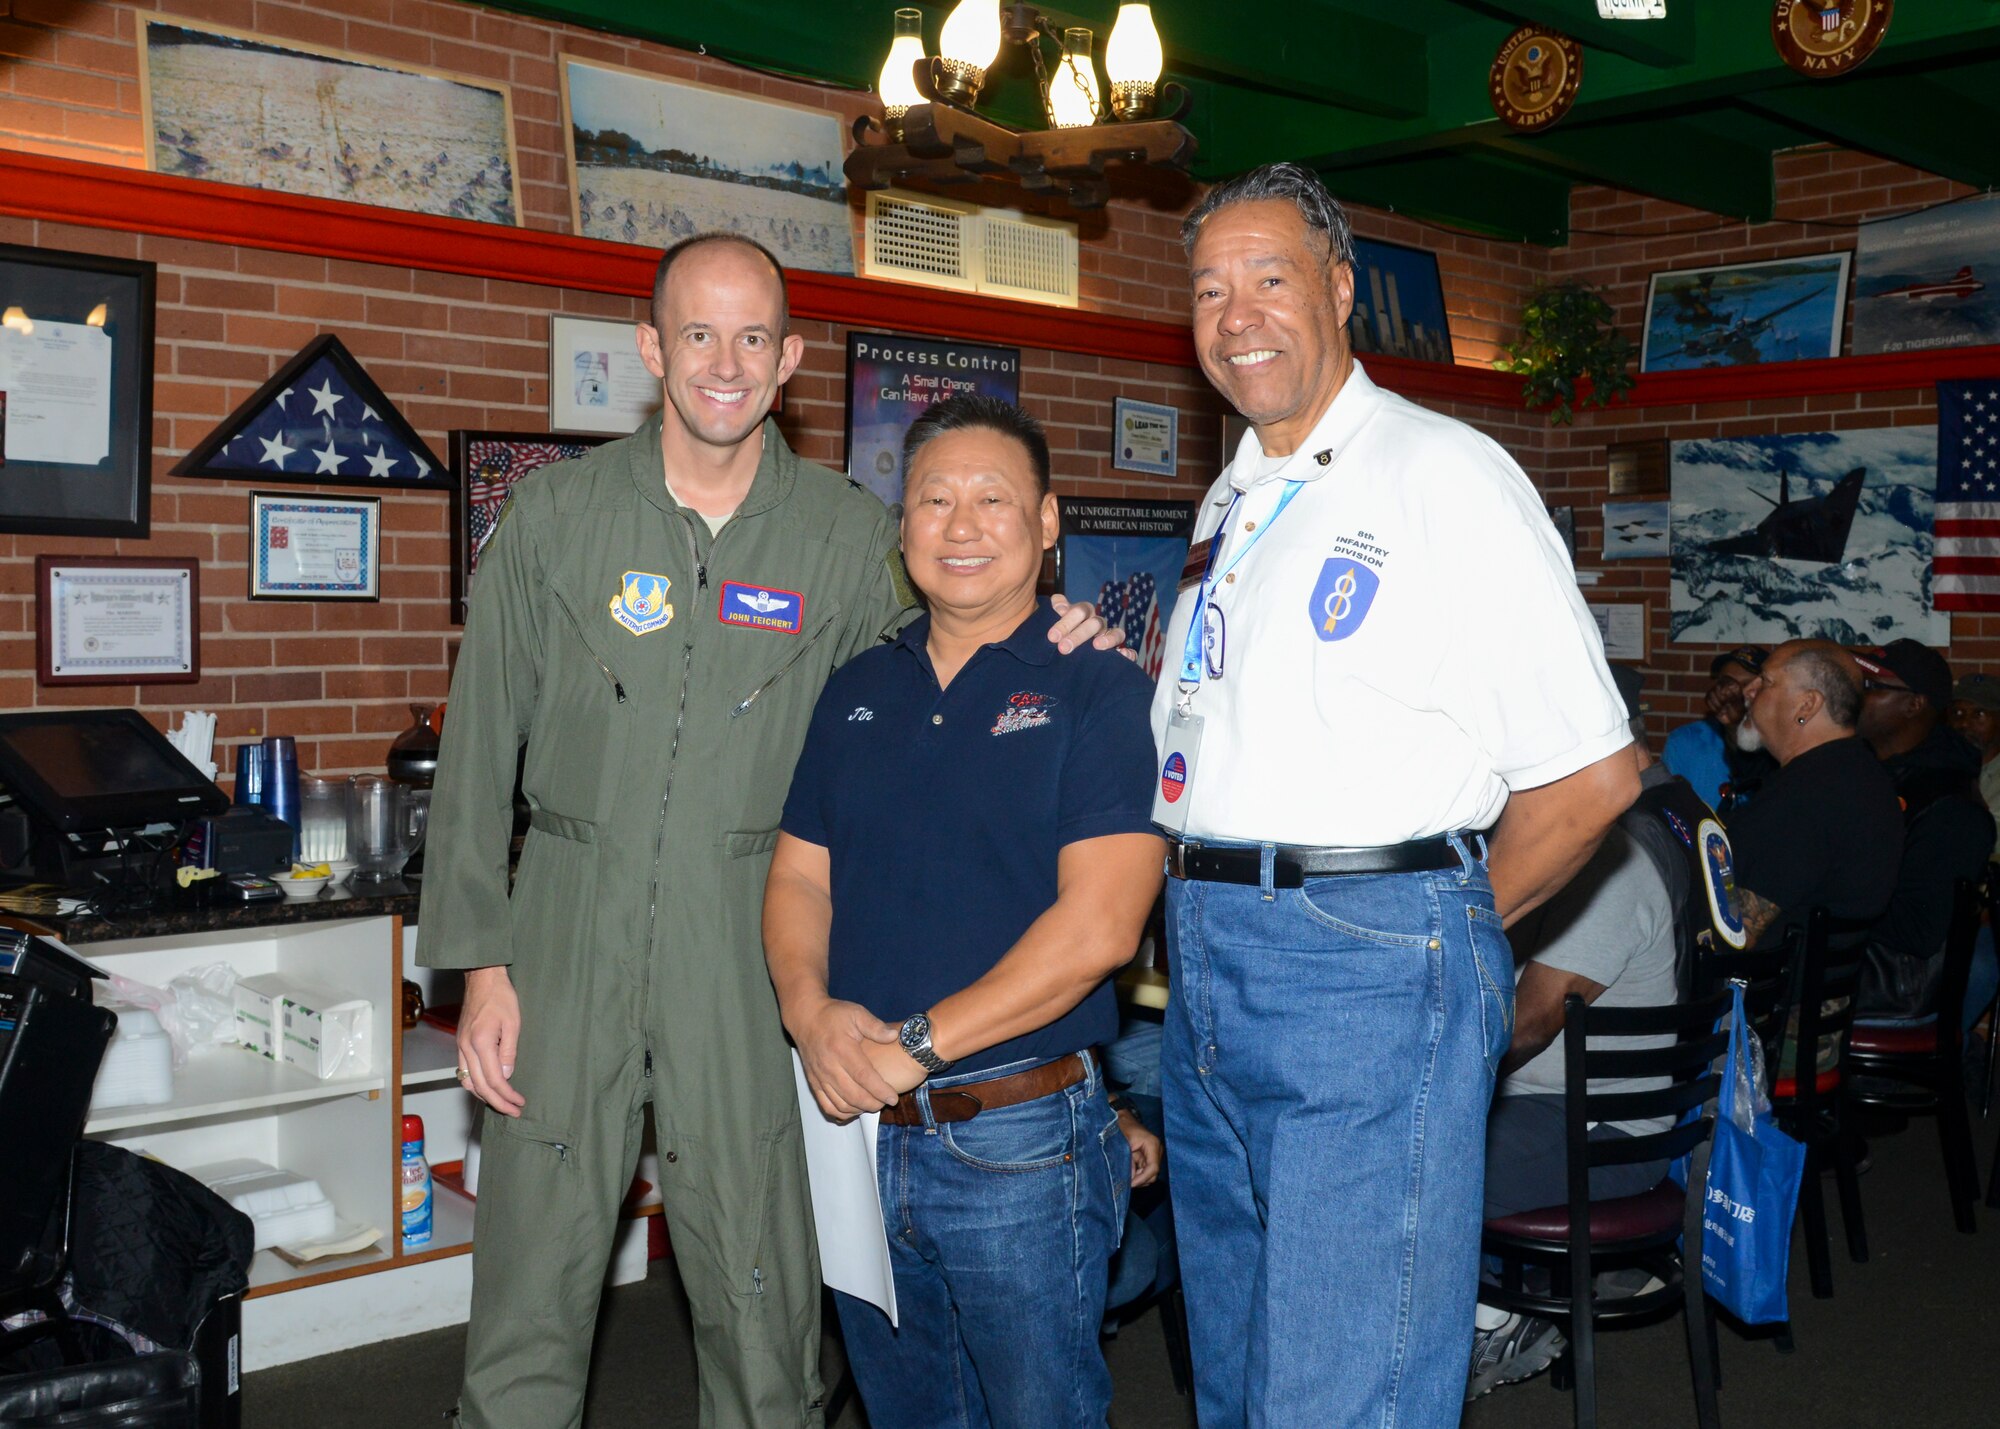 Brig. Gen. E. John Teichert, 412th Test Wing commander, Jin Hur, Crazy Otto’s Diner owner, and Juan Blanco, Coffee4Vets president, pose for a photo during a Coffee4Vets gathering at Crazy Otto’s Diner in Lancaster, California, Nov. 6. Coffee4Vets meet every Tuesday at the restaurant for fellowship and camaraderie. (U.S. Air Force photo by Giancarlo Casem)